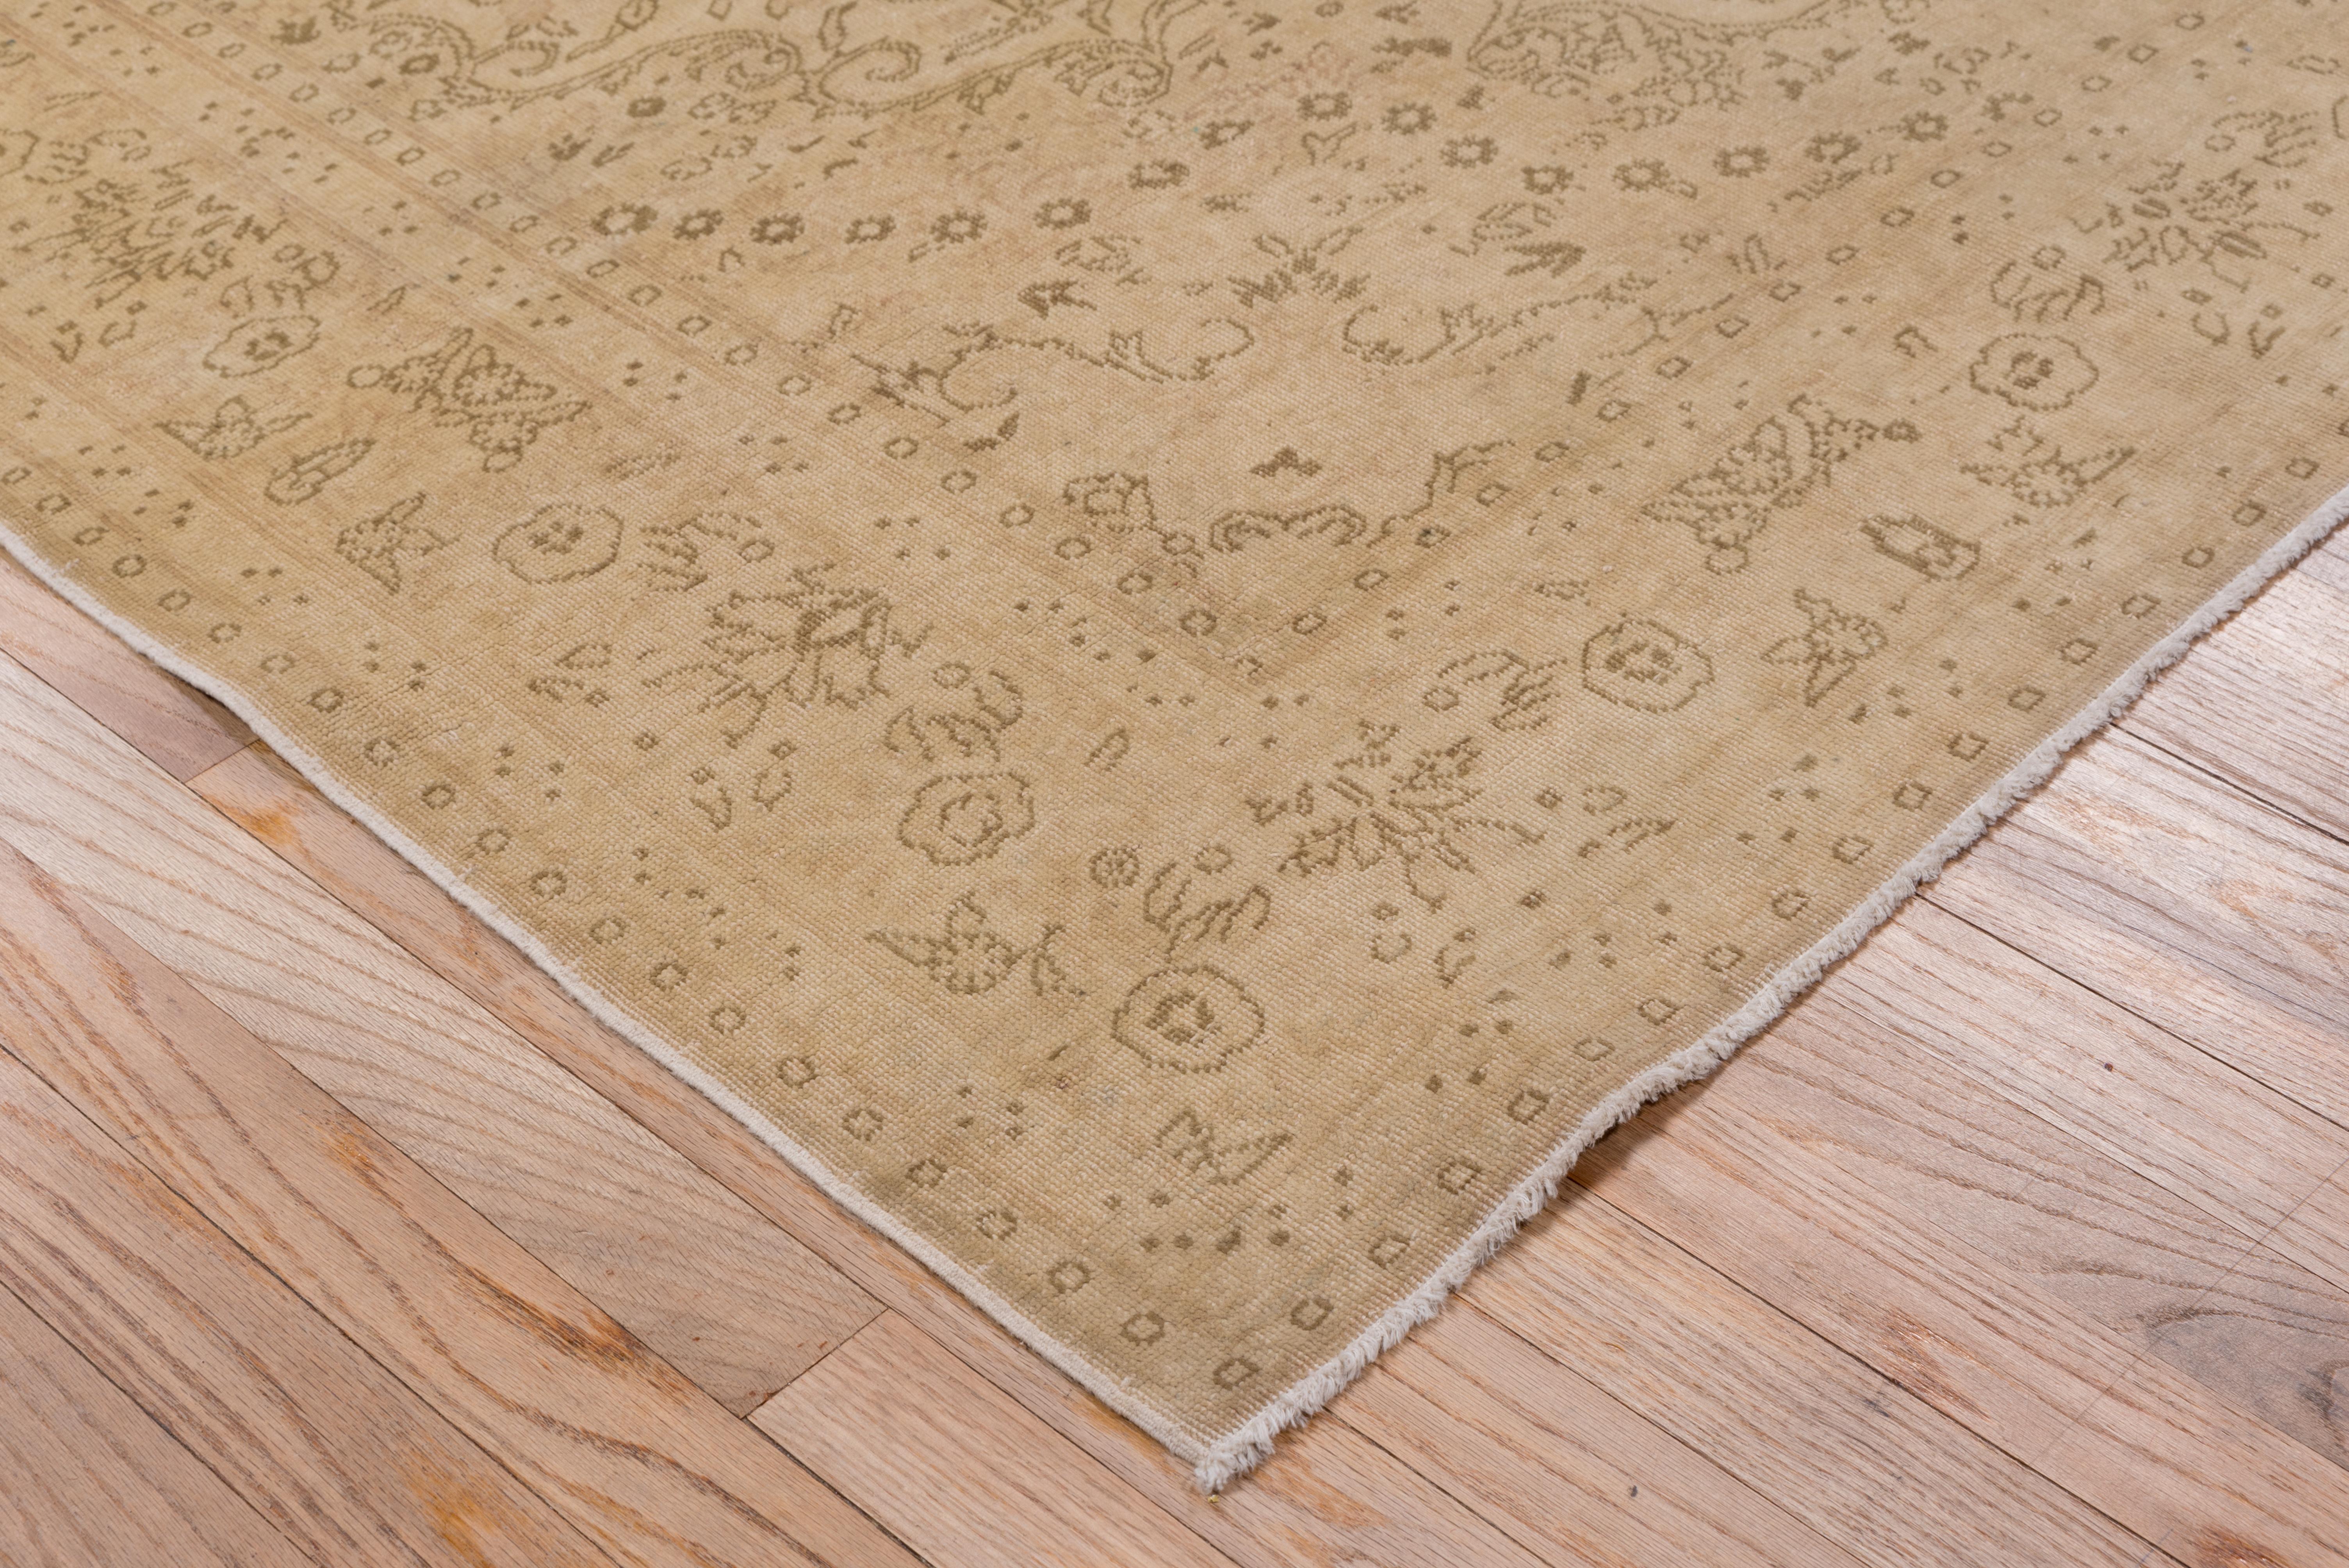 Formal Sivas Rug, circa 1940s In Good Condition For Sale In New York, NY